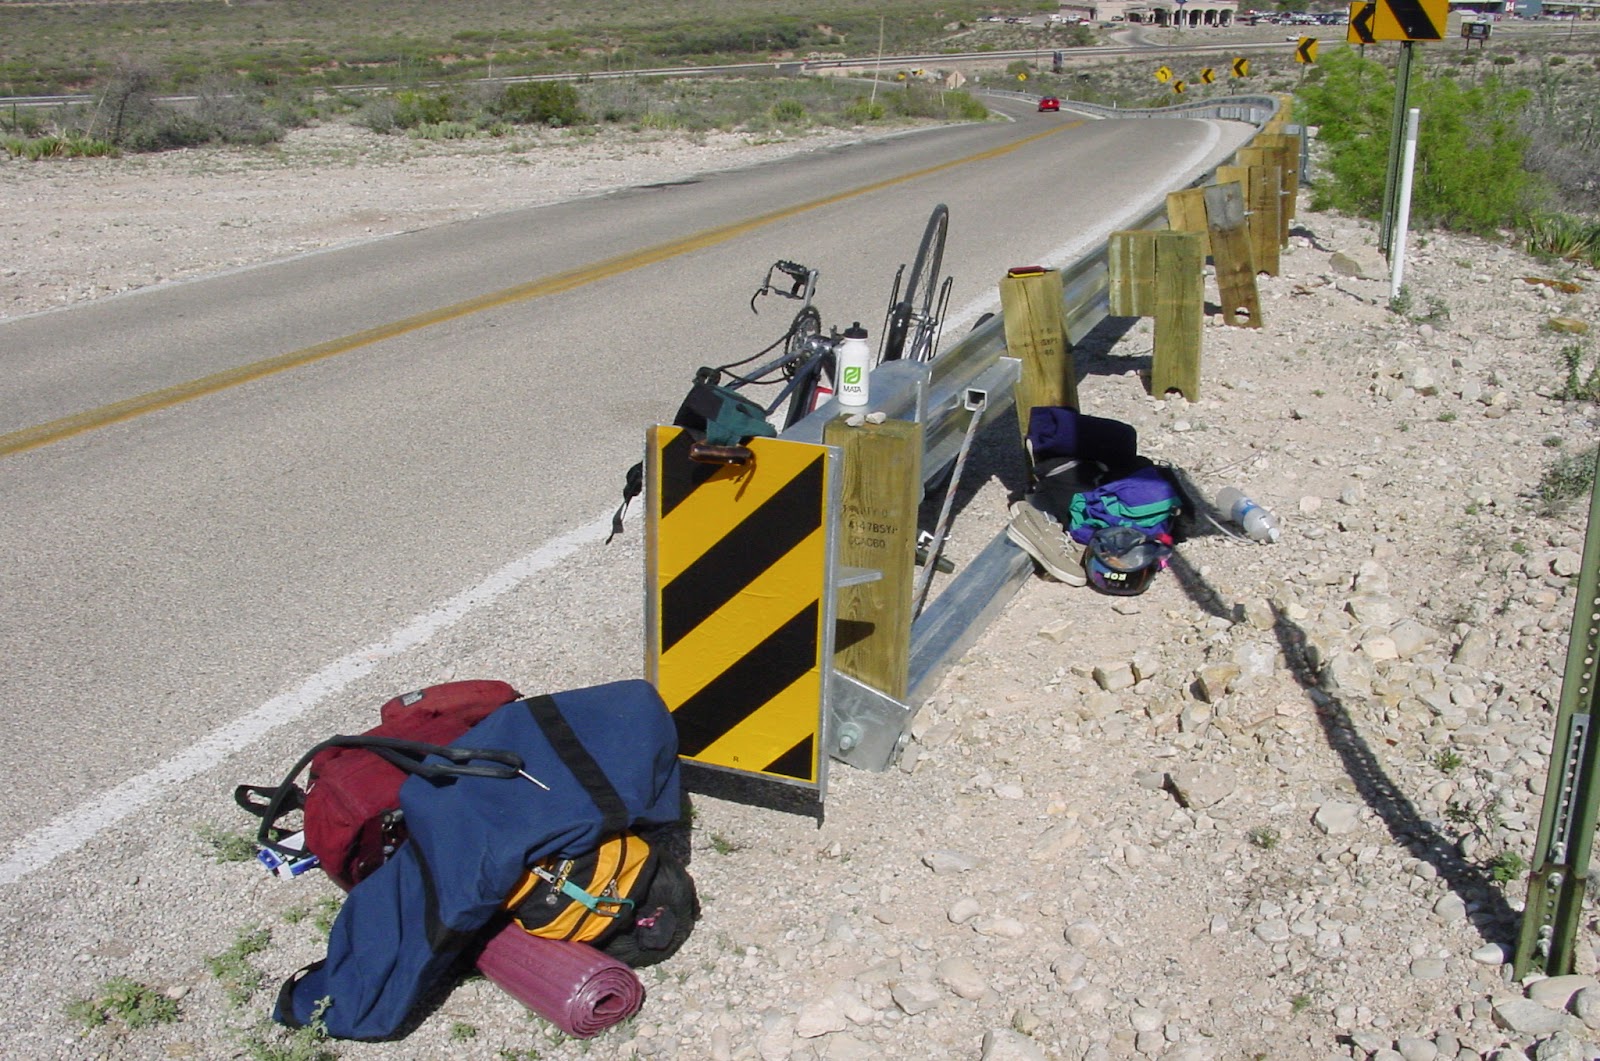 Bags strewn on the side of the road with a bicycle upside down leaning on a guardrail. Desert surrounds. 